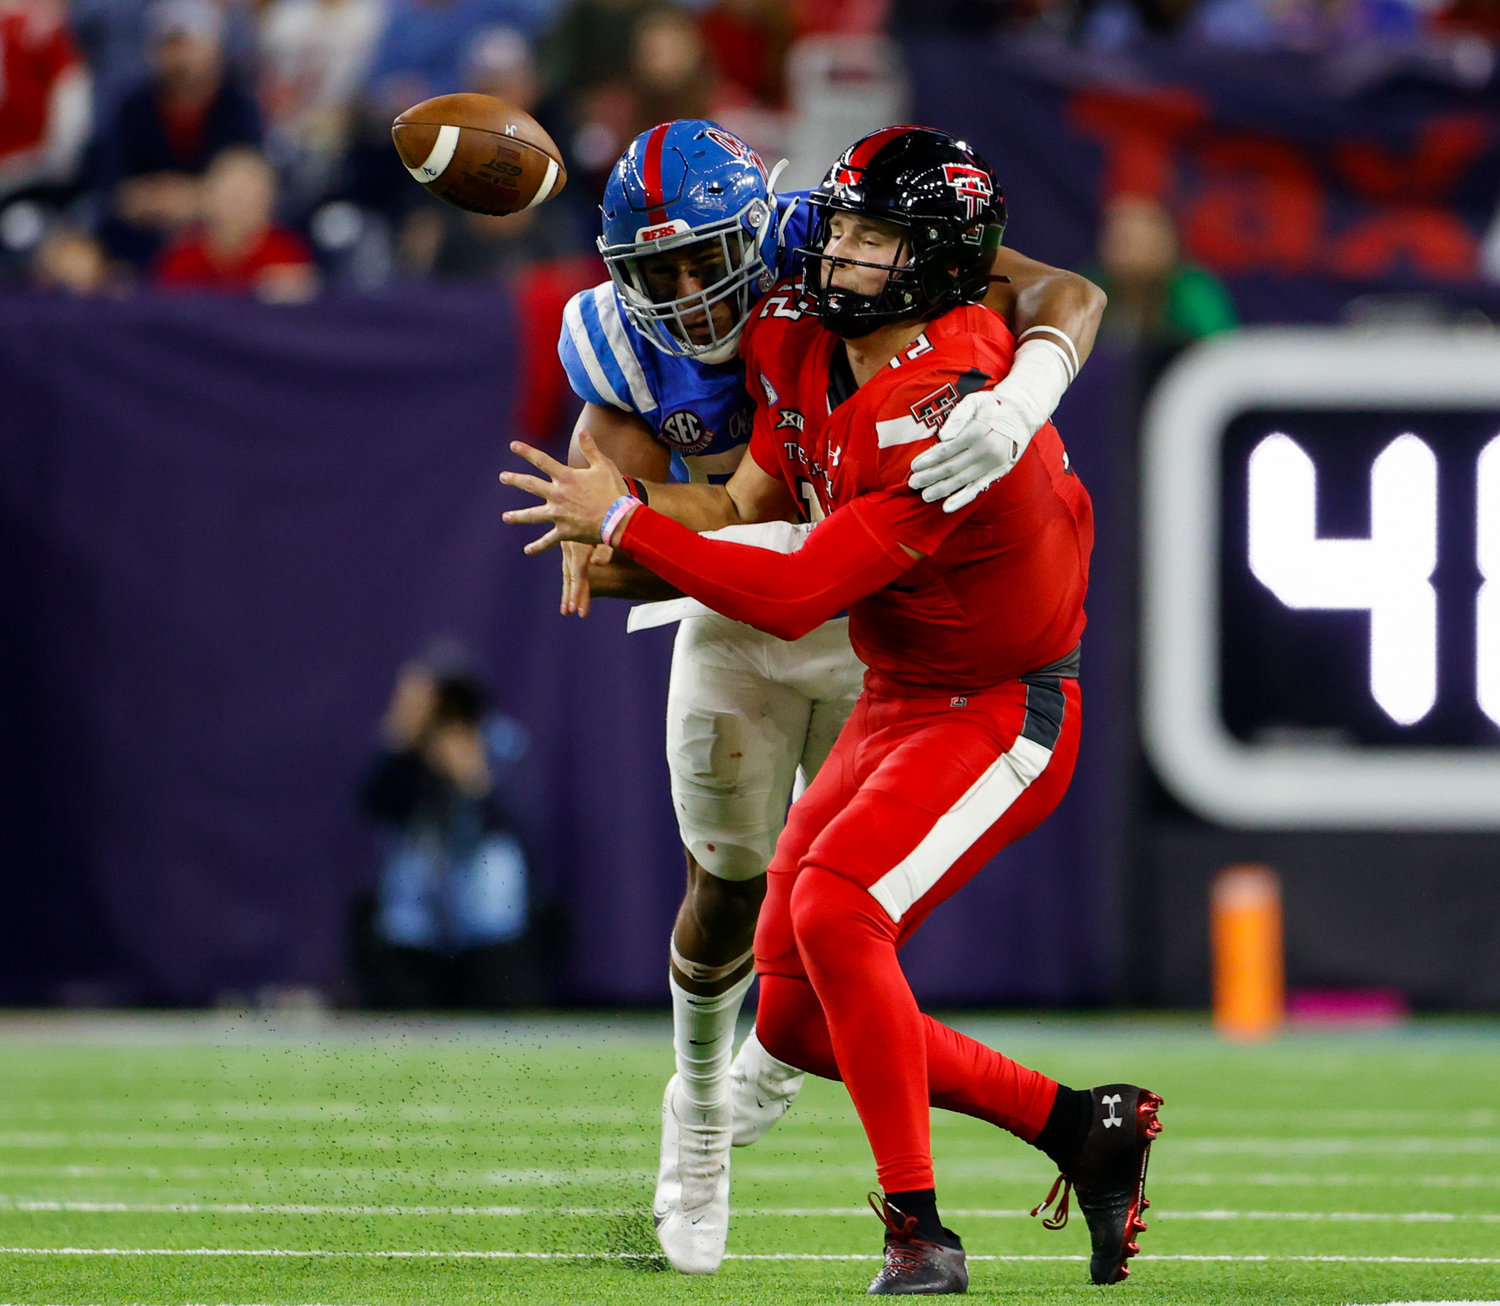 Mississippi defensive end Tavius Robinson (95) forces a fumble on a sack of Texas Tech quarterback Tyler Shough (12) during the TaxAct Texas Bowl on Dec. 28, 2022 in Houston.